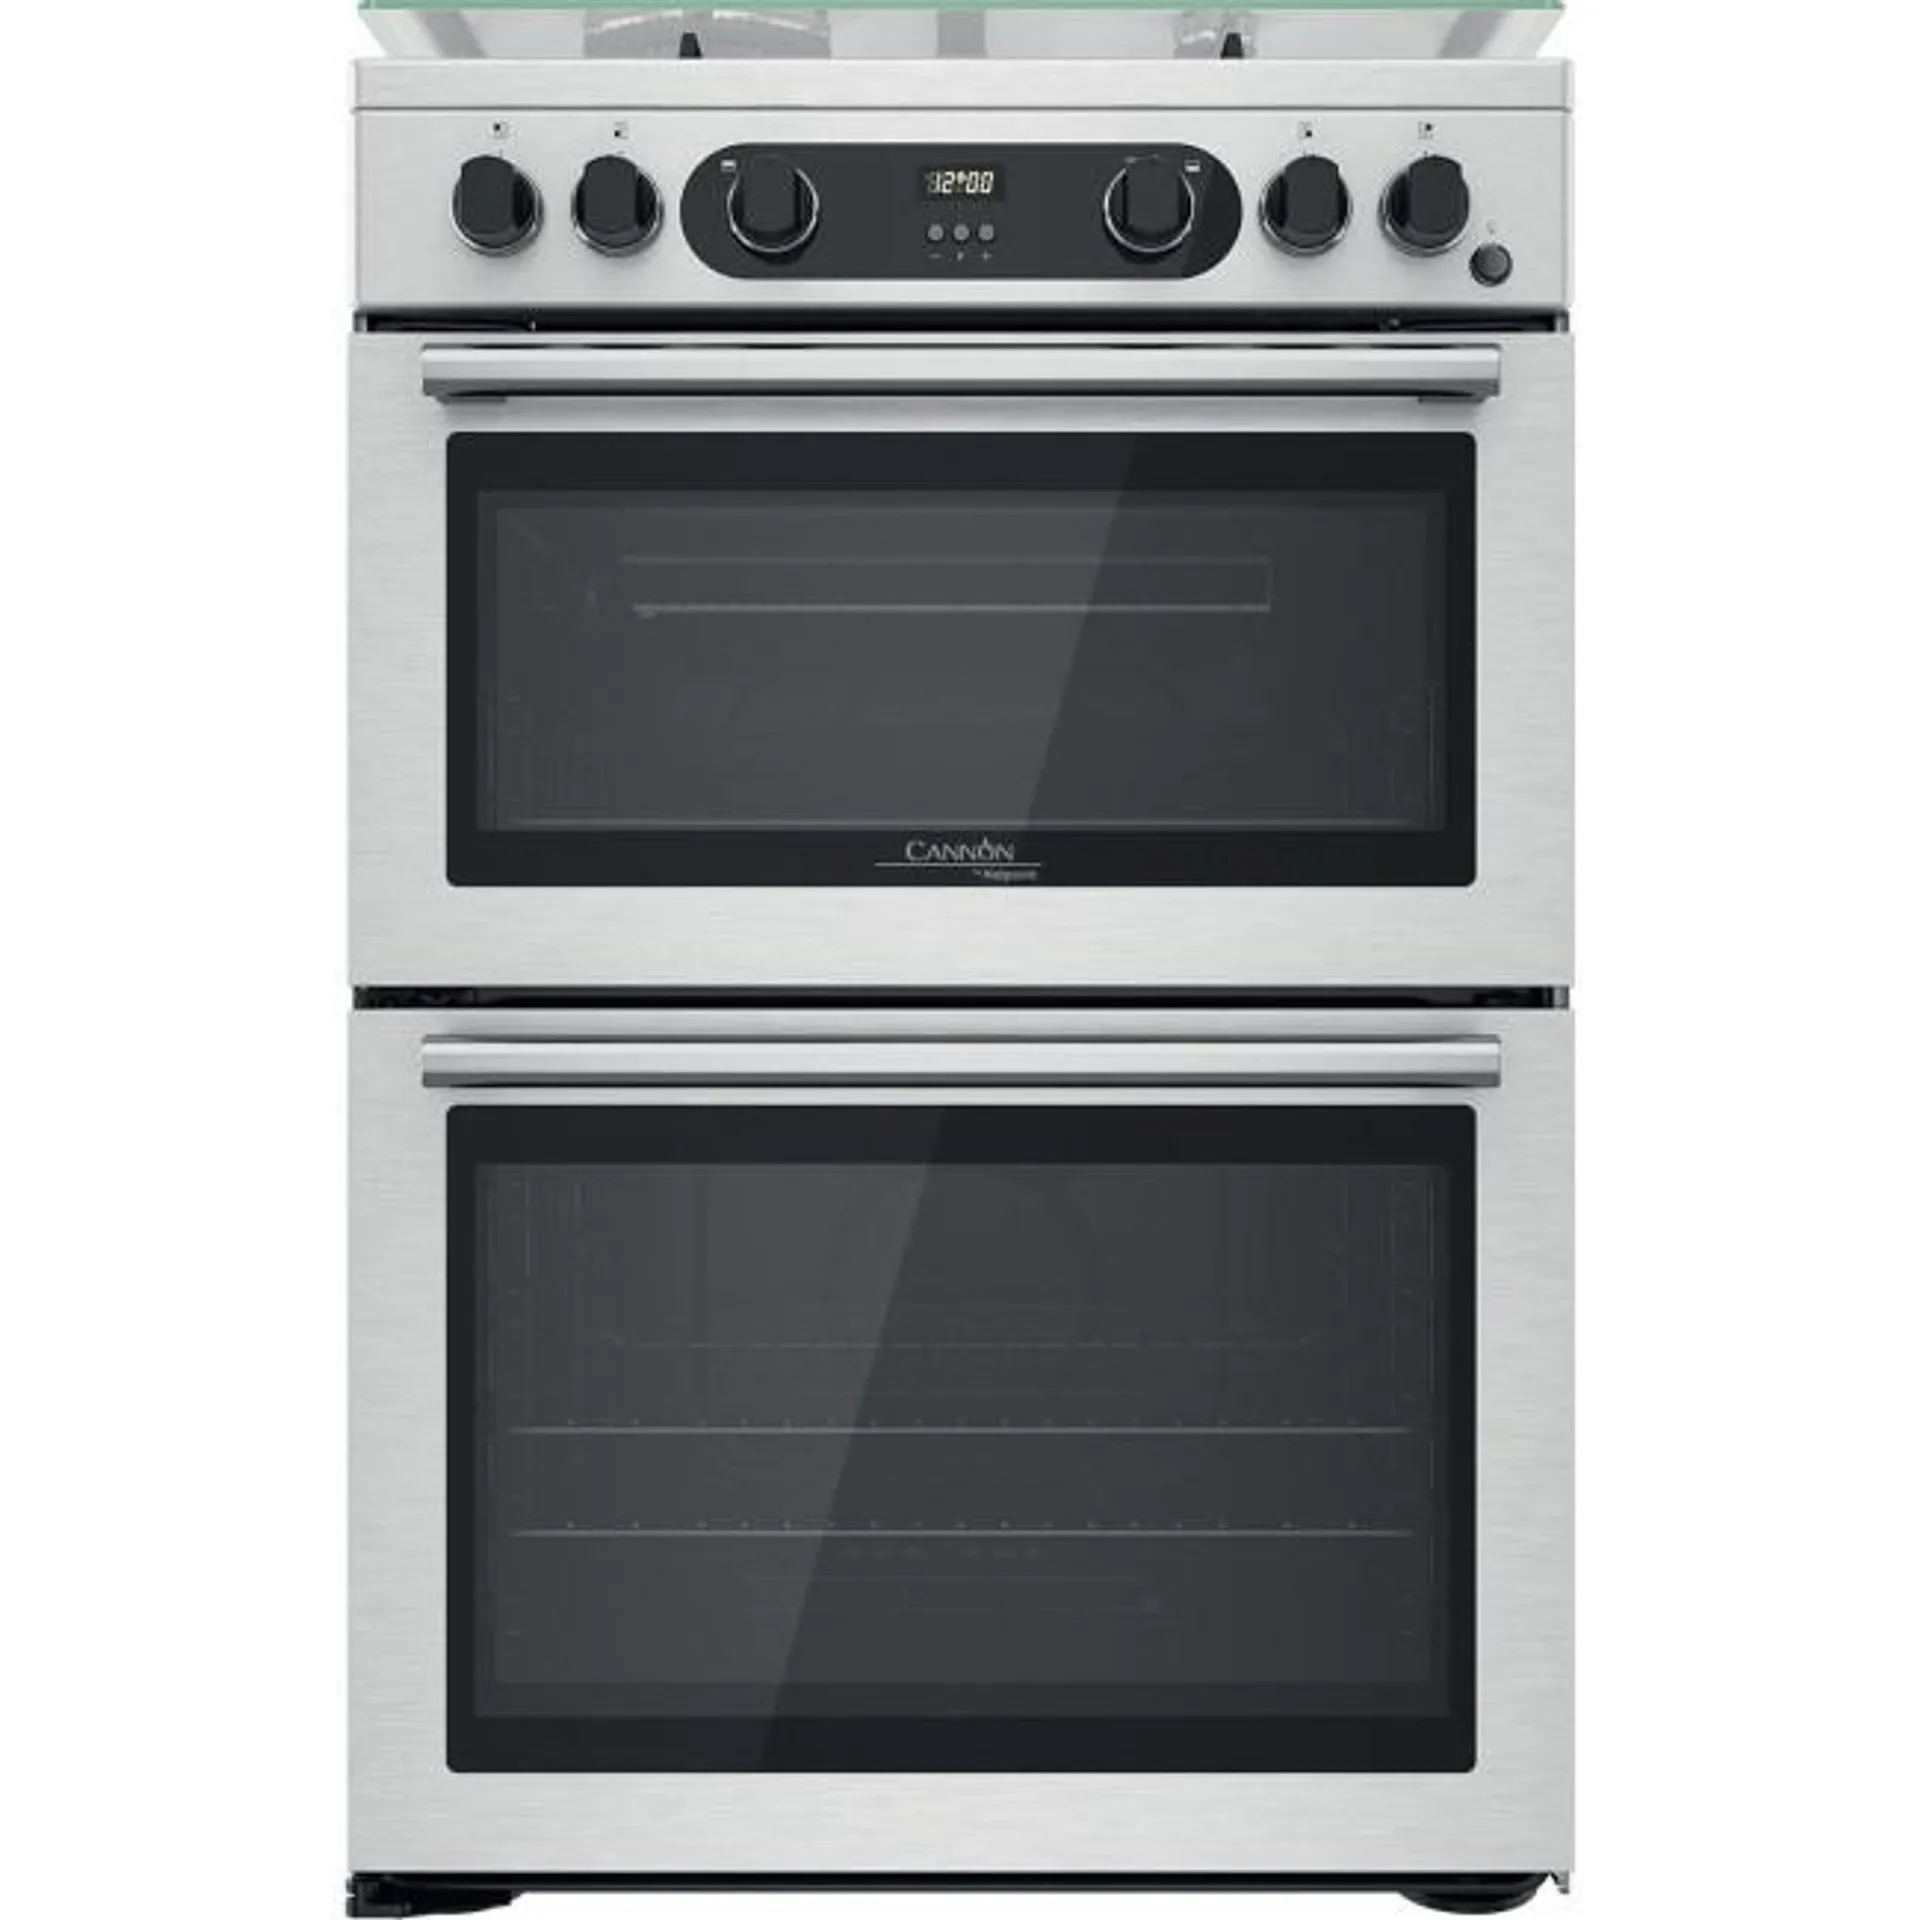 Hotpoint Cannon 60cm Double Oven Gas Cooker - Stainless Steel